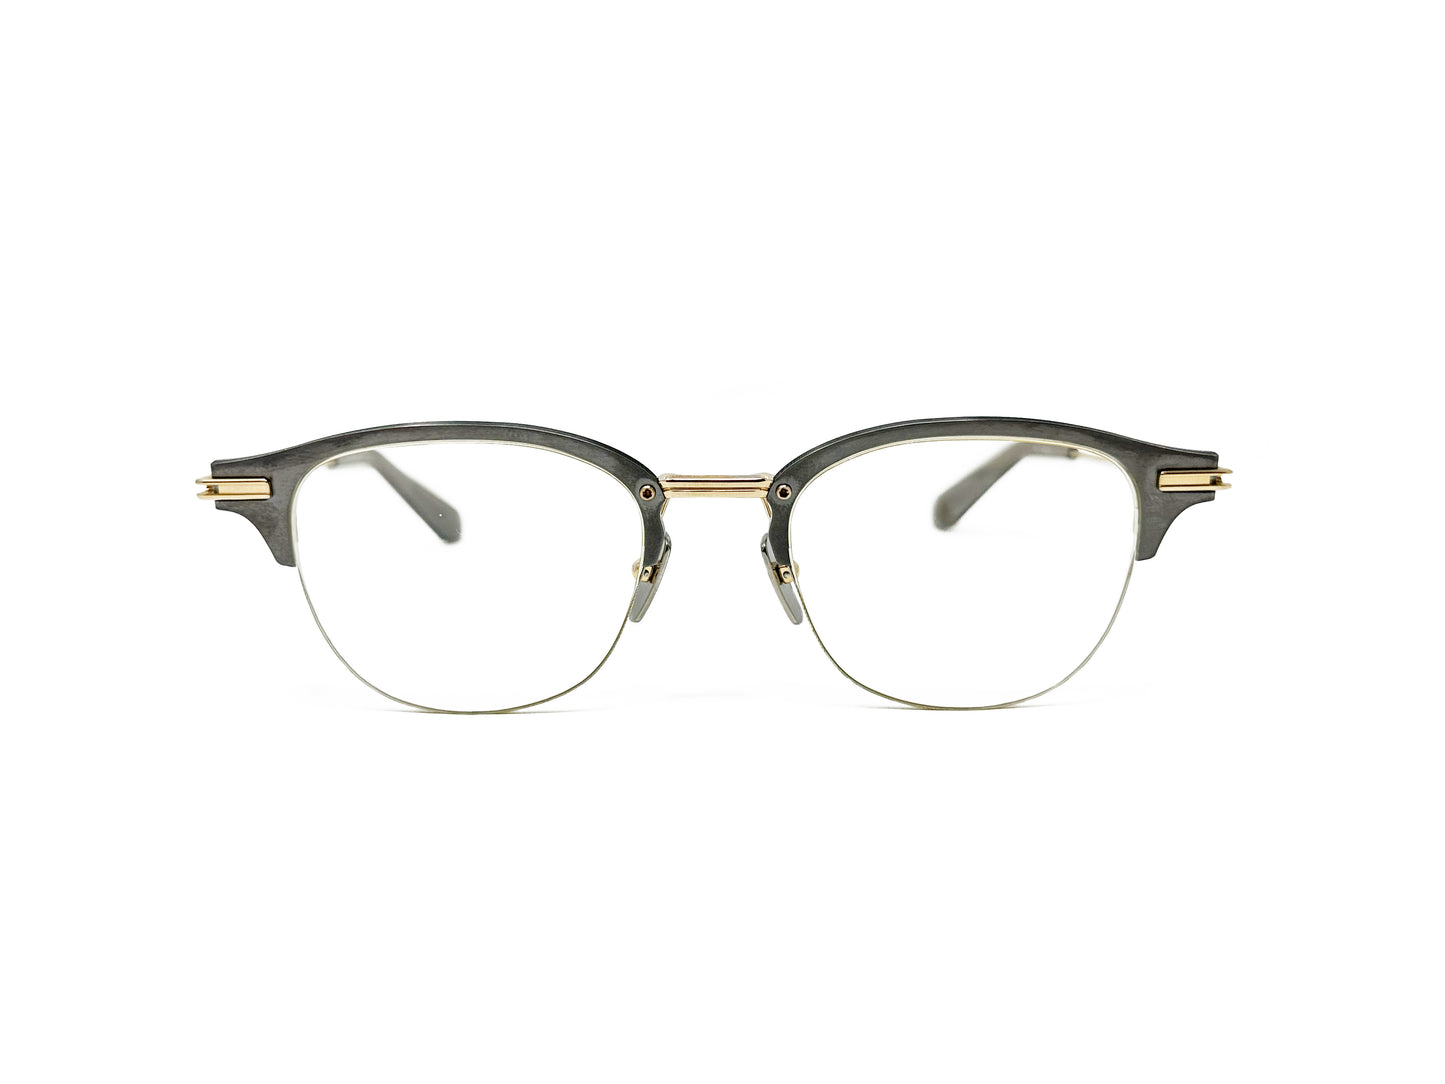 Dita Eyewear half-rim, clubmaster-style, metal, optical frame. Model: Iambic. Color: 02 - Antique Silver. Front view. 